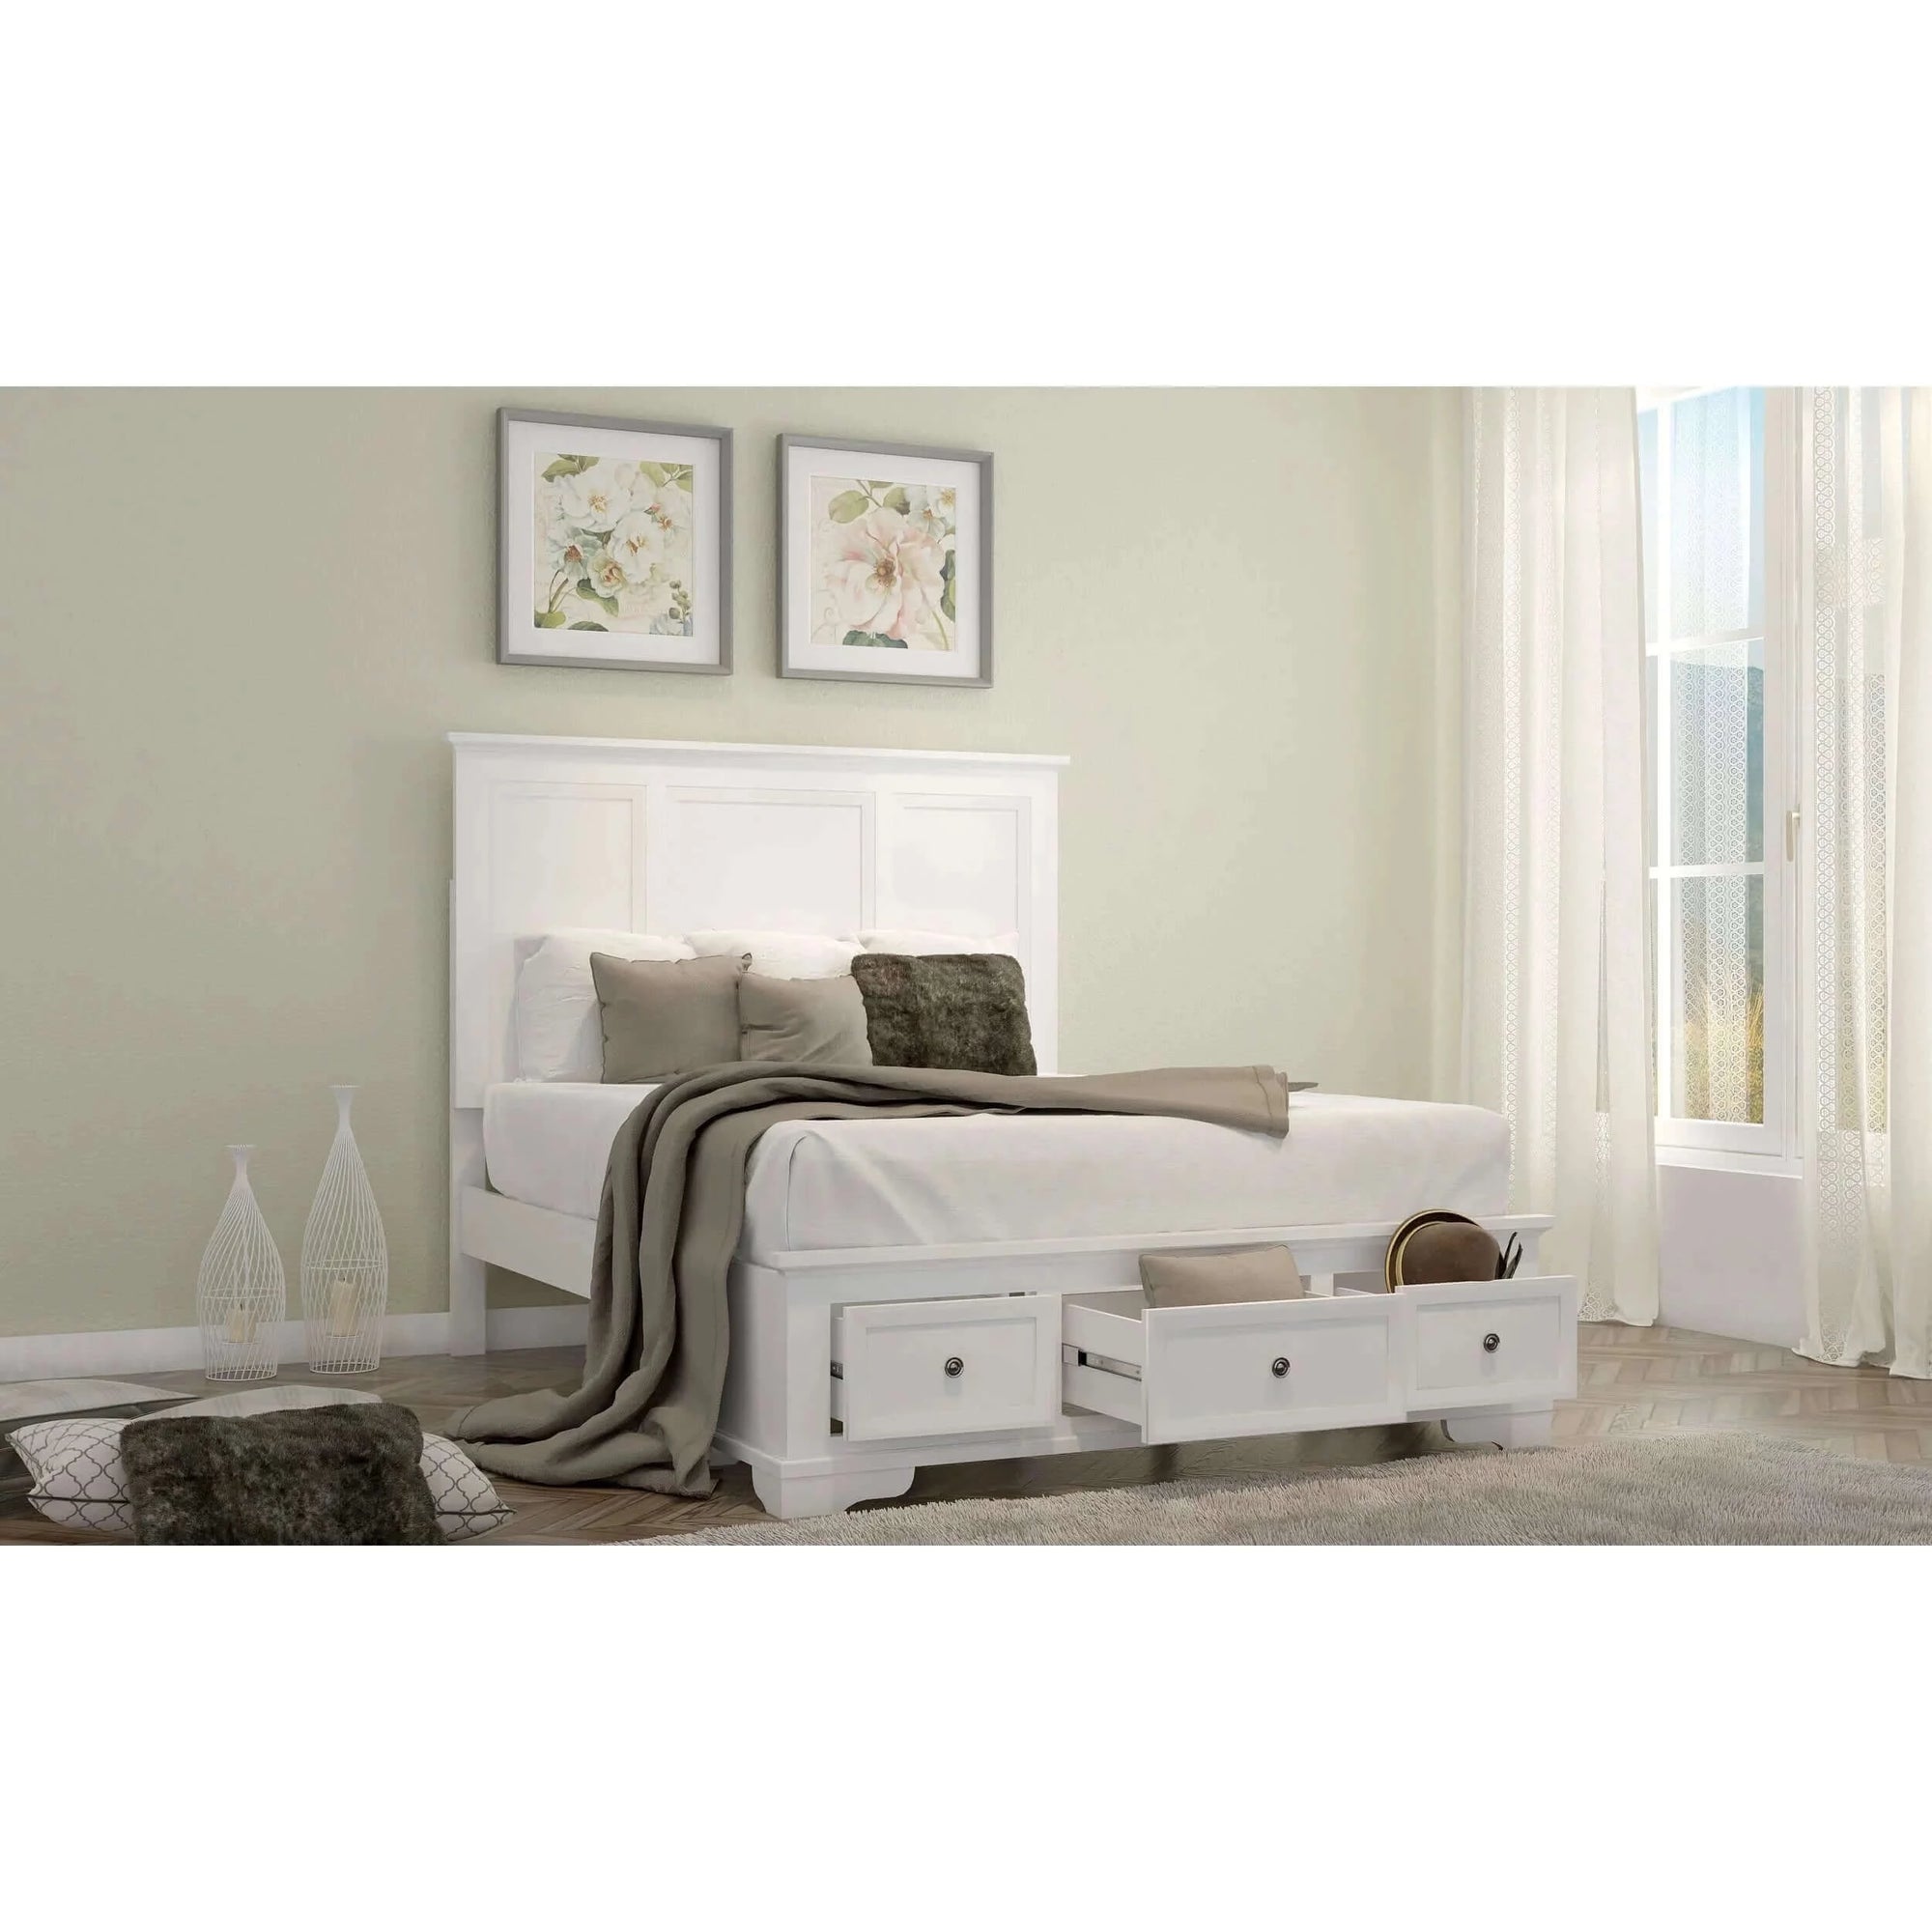 Buy celosia king size bed frame timber mattress base with storage drawers - white - upinteriors-Upinteriors